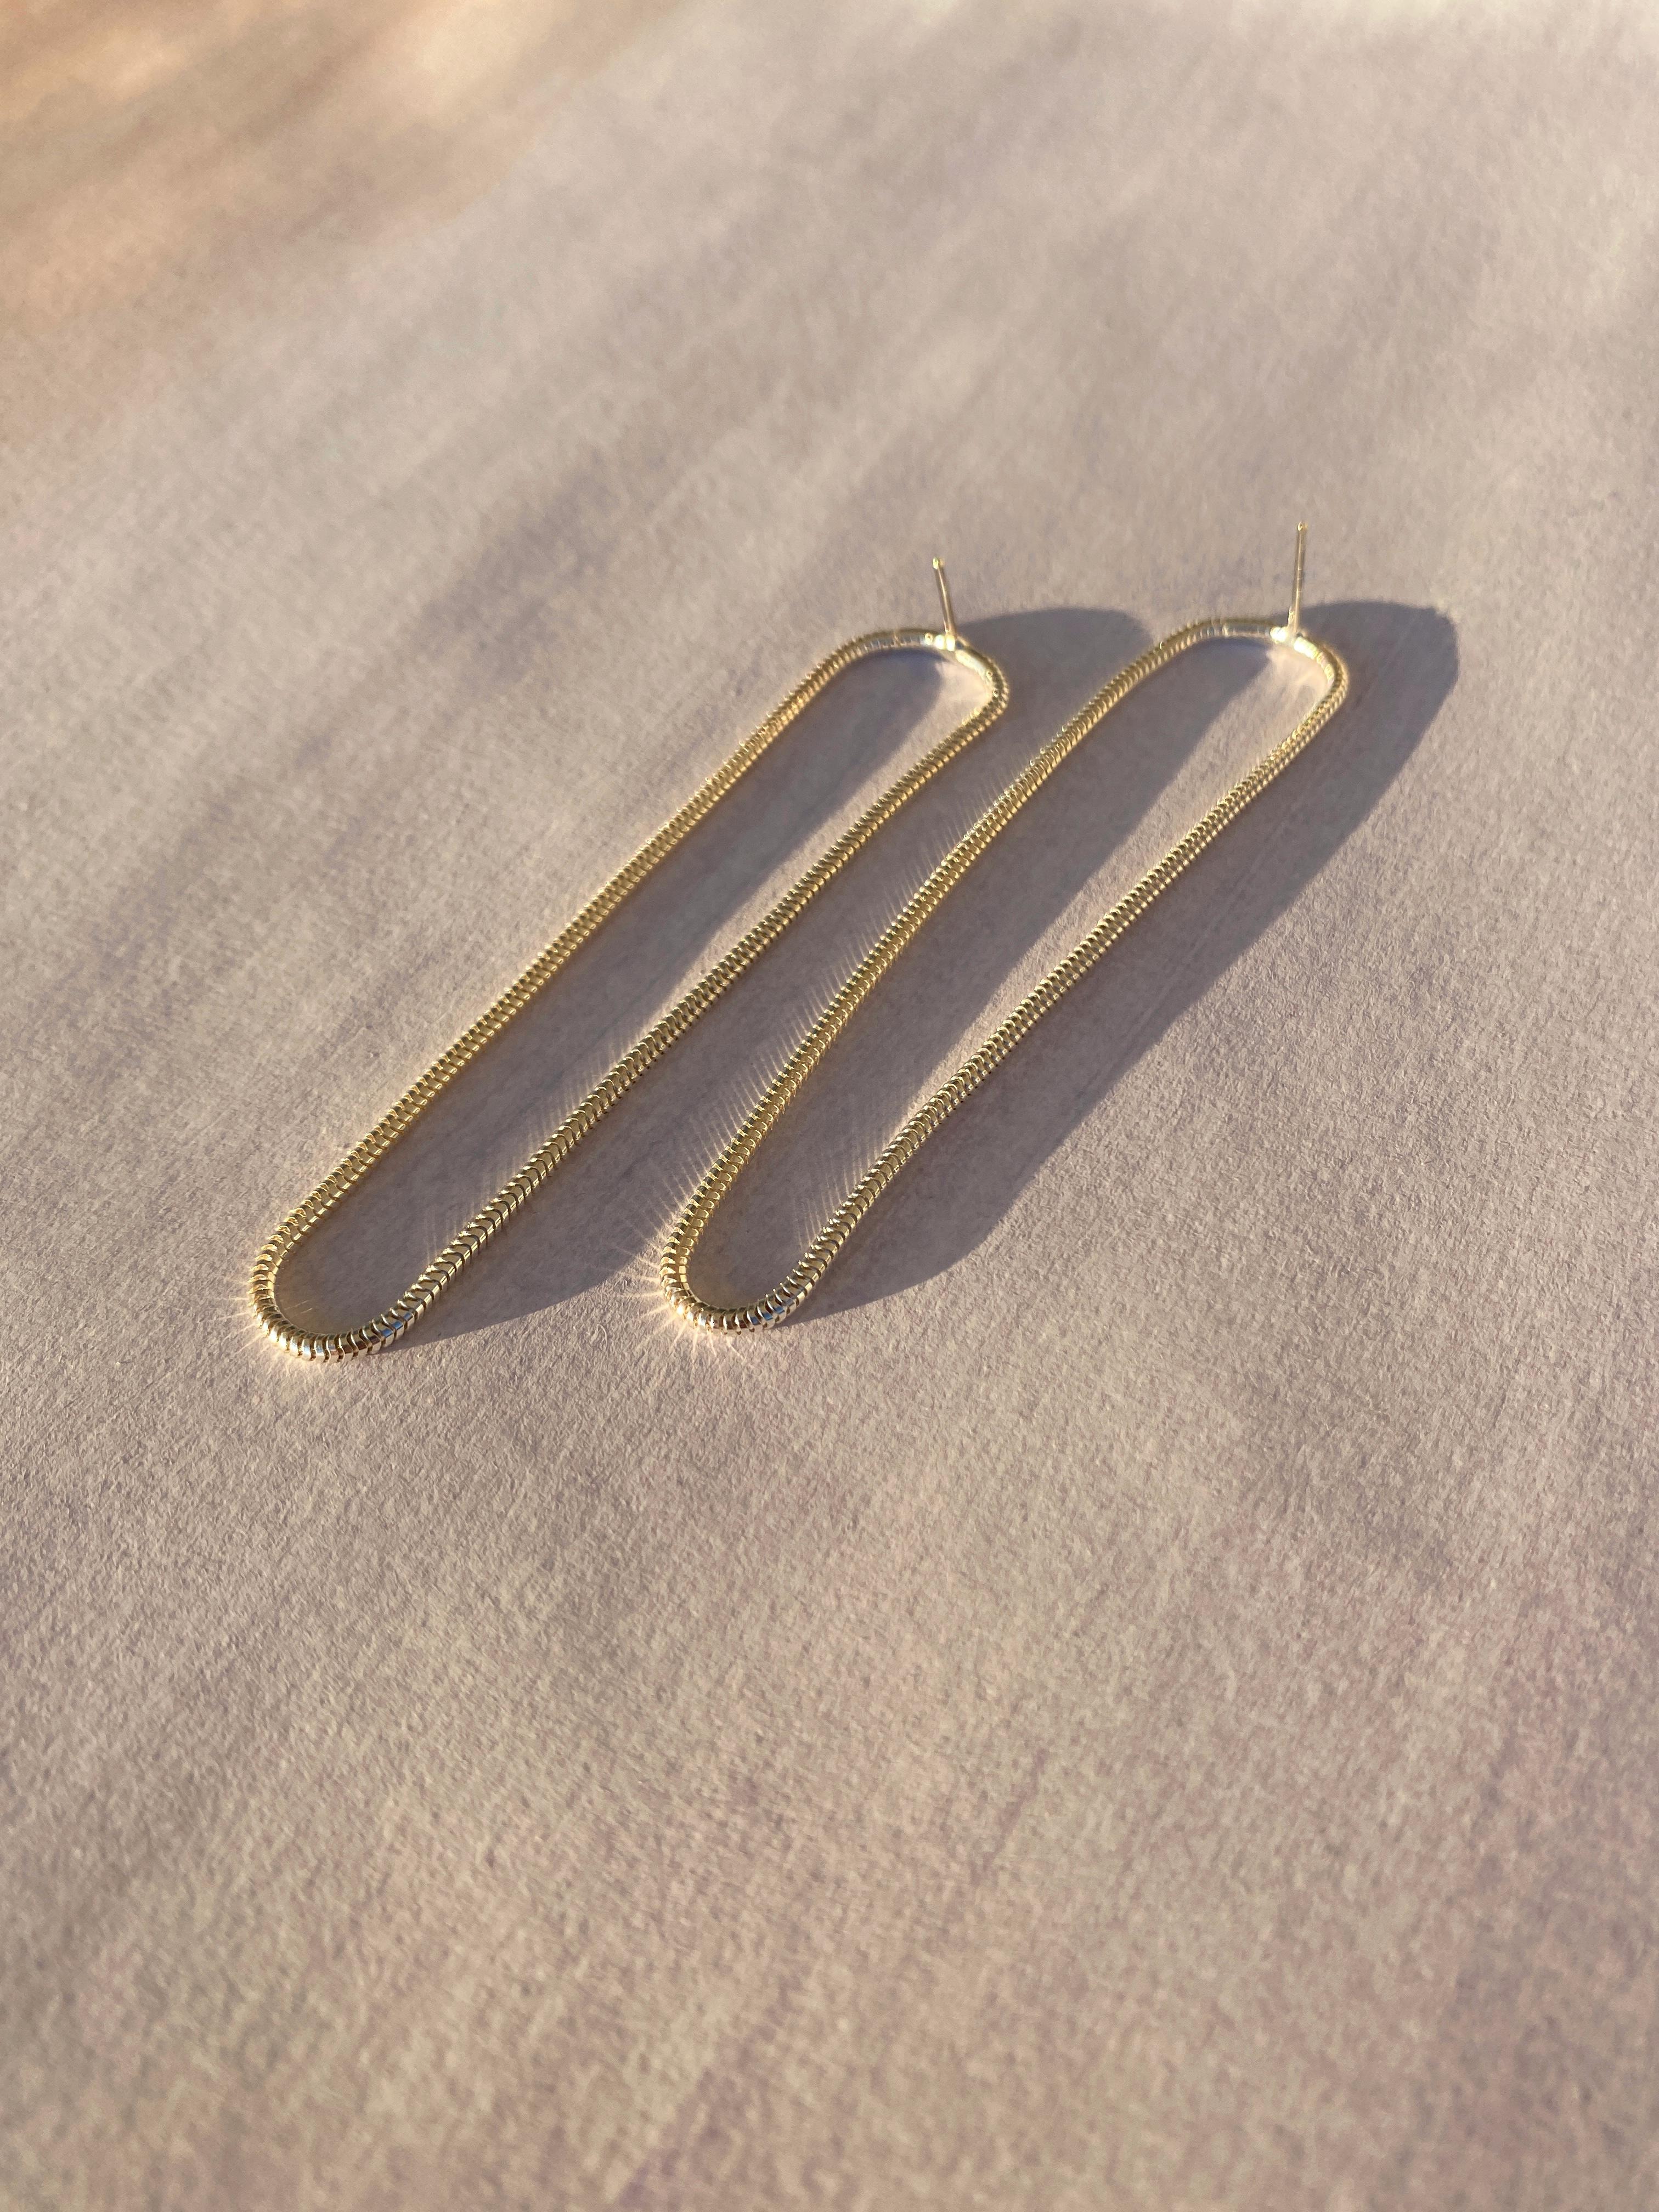 Earrings Long Minimal Snake Chain 18 Karat Gold-Plated Silver Greek Earrings In New Condition For Sale In Athens, GR